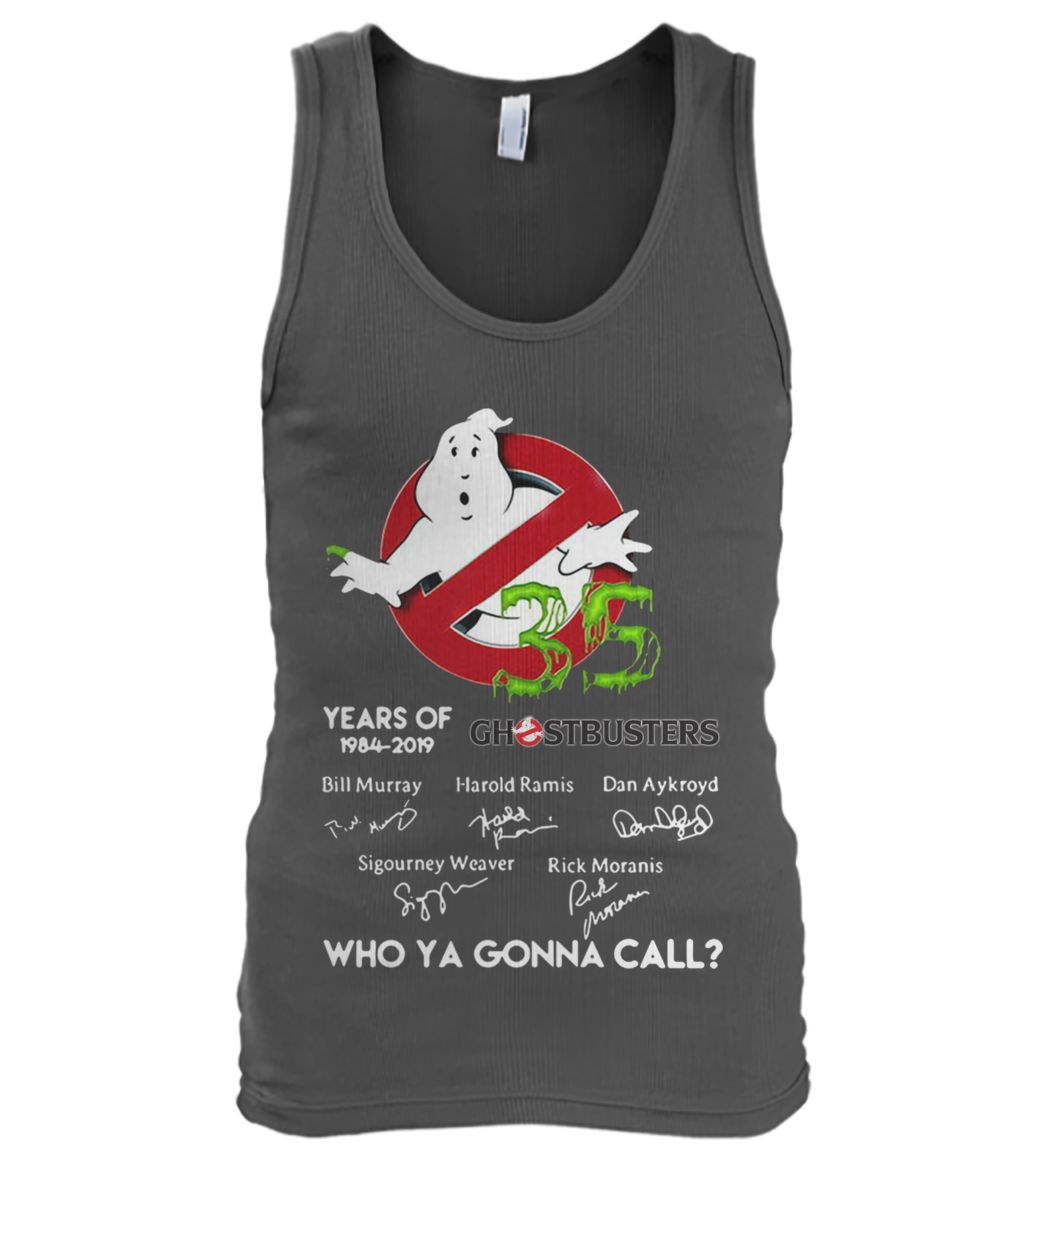 35 years of ghostbusters 1984 2019 signatures who ya gonna call men's tank top